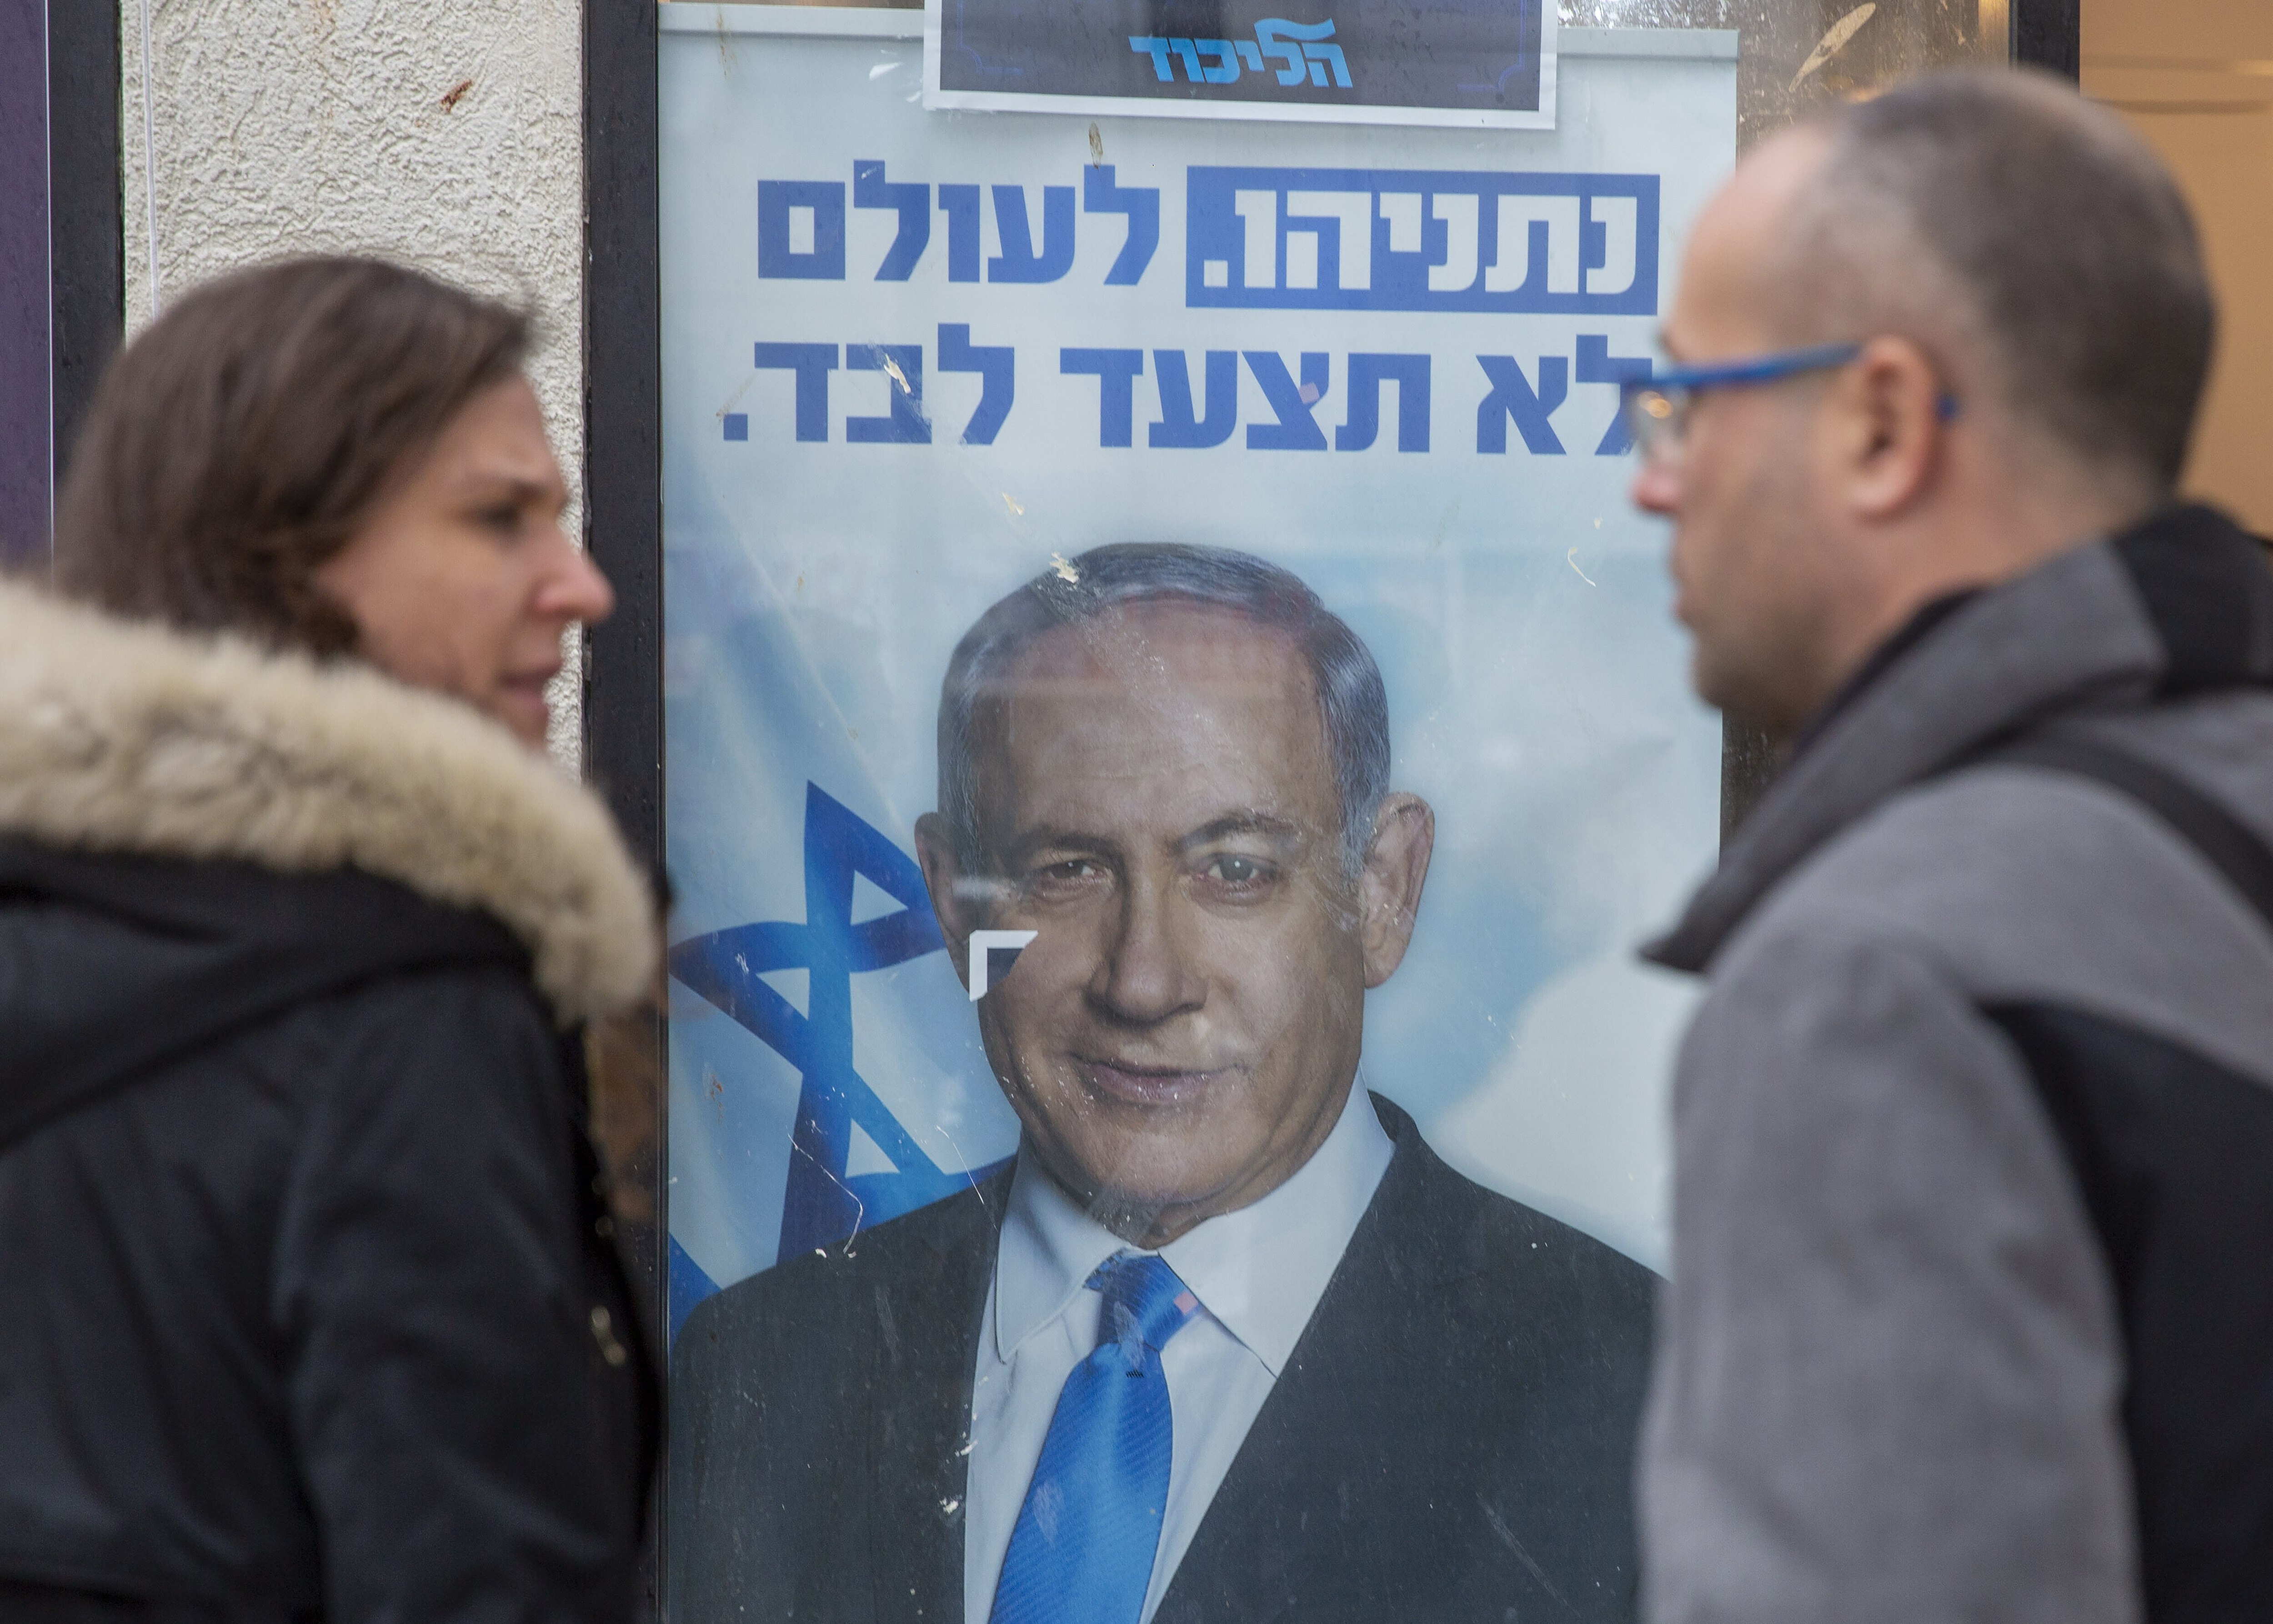 Israel S Prime Minister Faces Challenge In Likud Party Vote